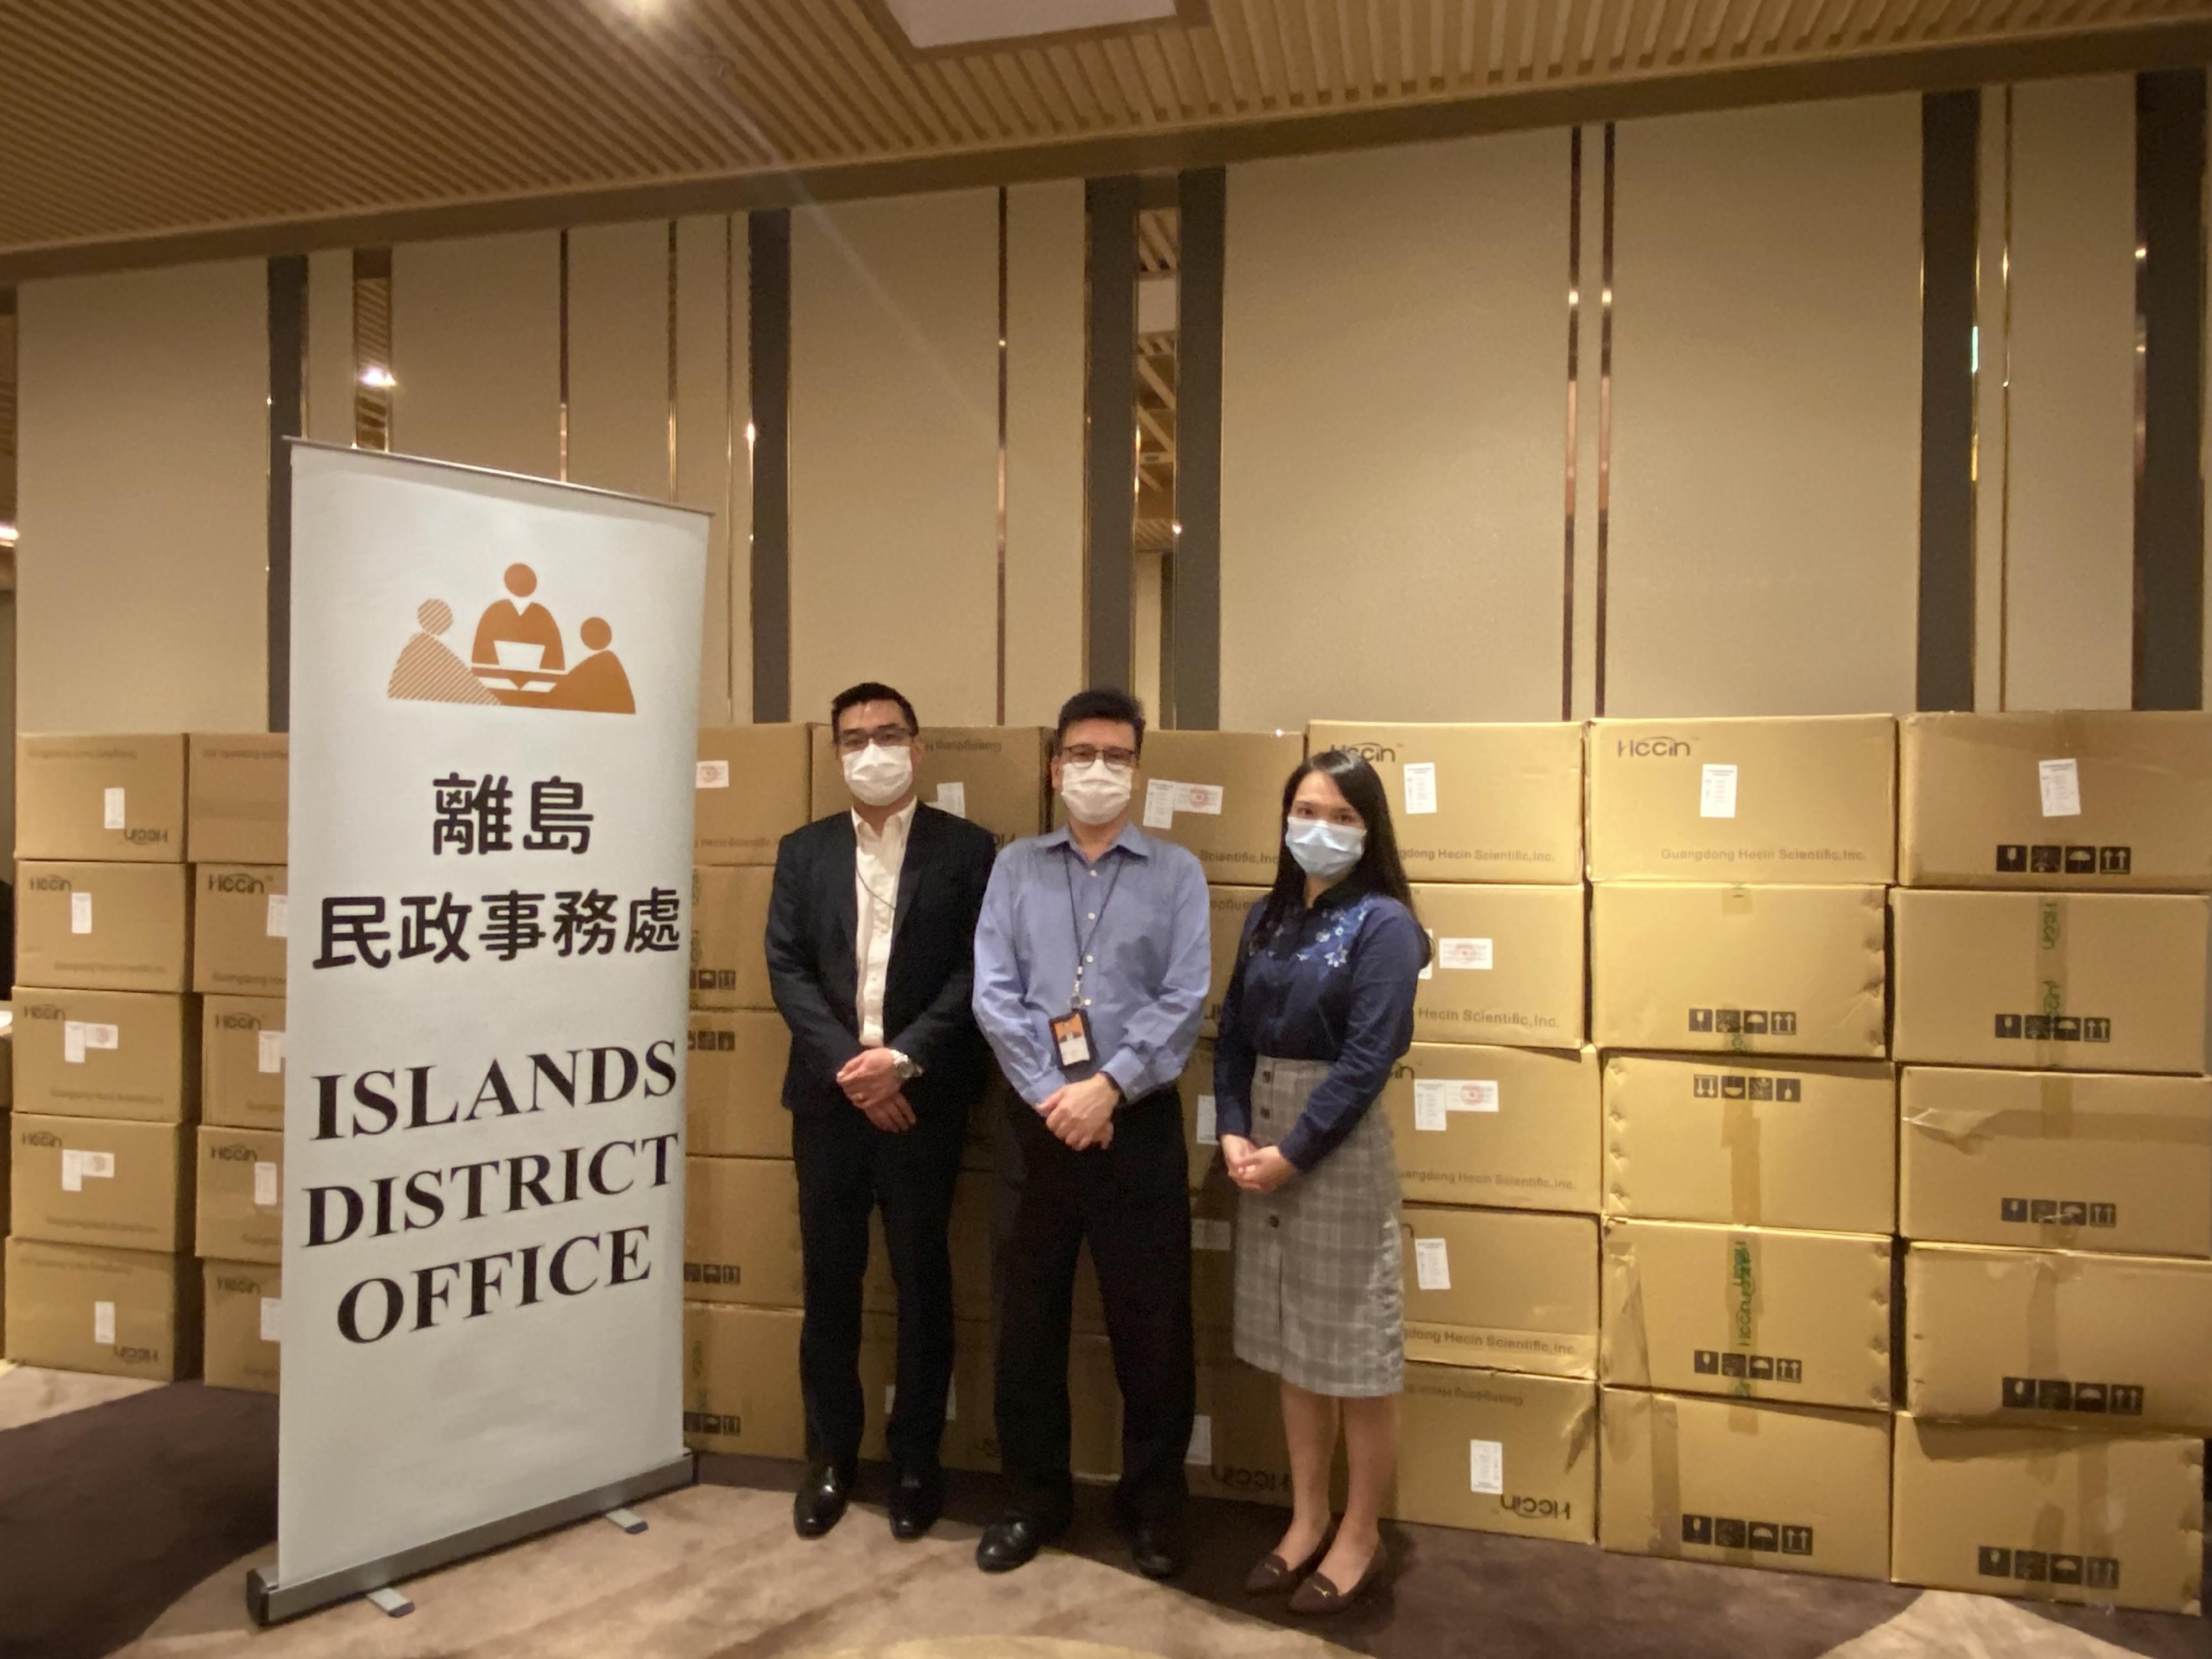 The Islands District Office today (May 5) distributed COVID-19 rapid test kits to households, cleansing workers and property management staff living and working in the Visionary for voluntary testing through the property management company.